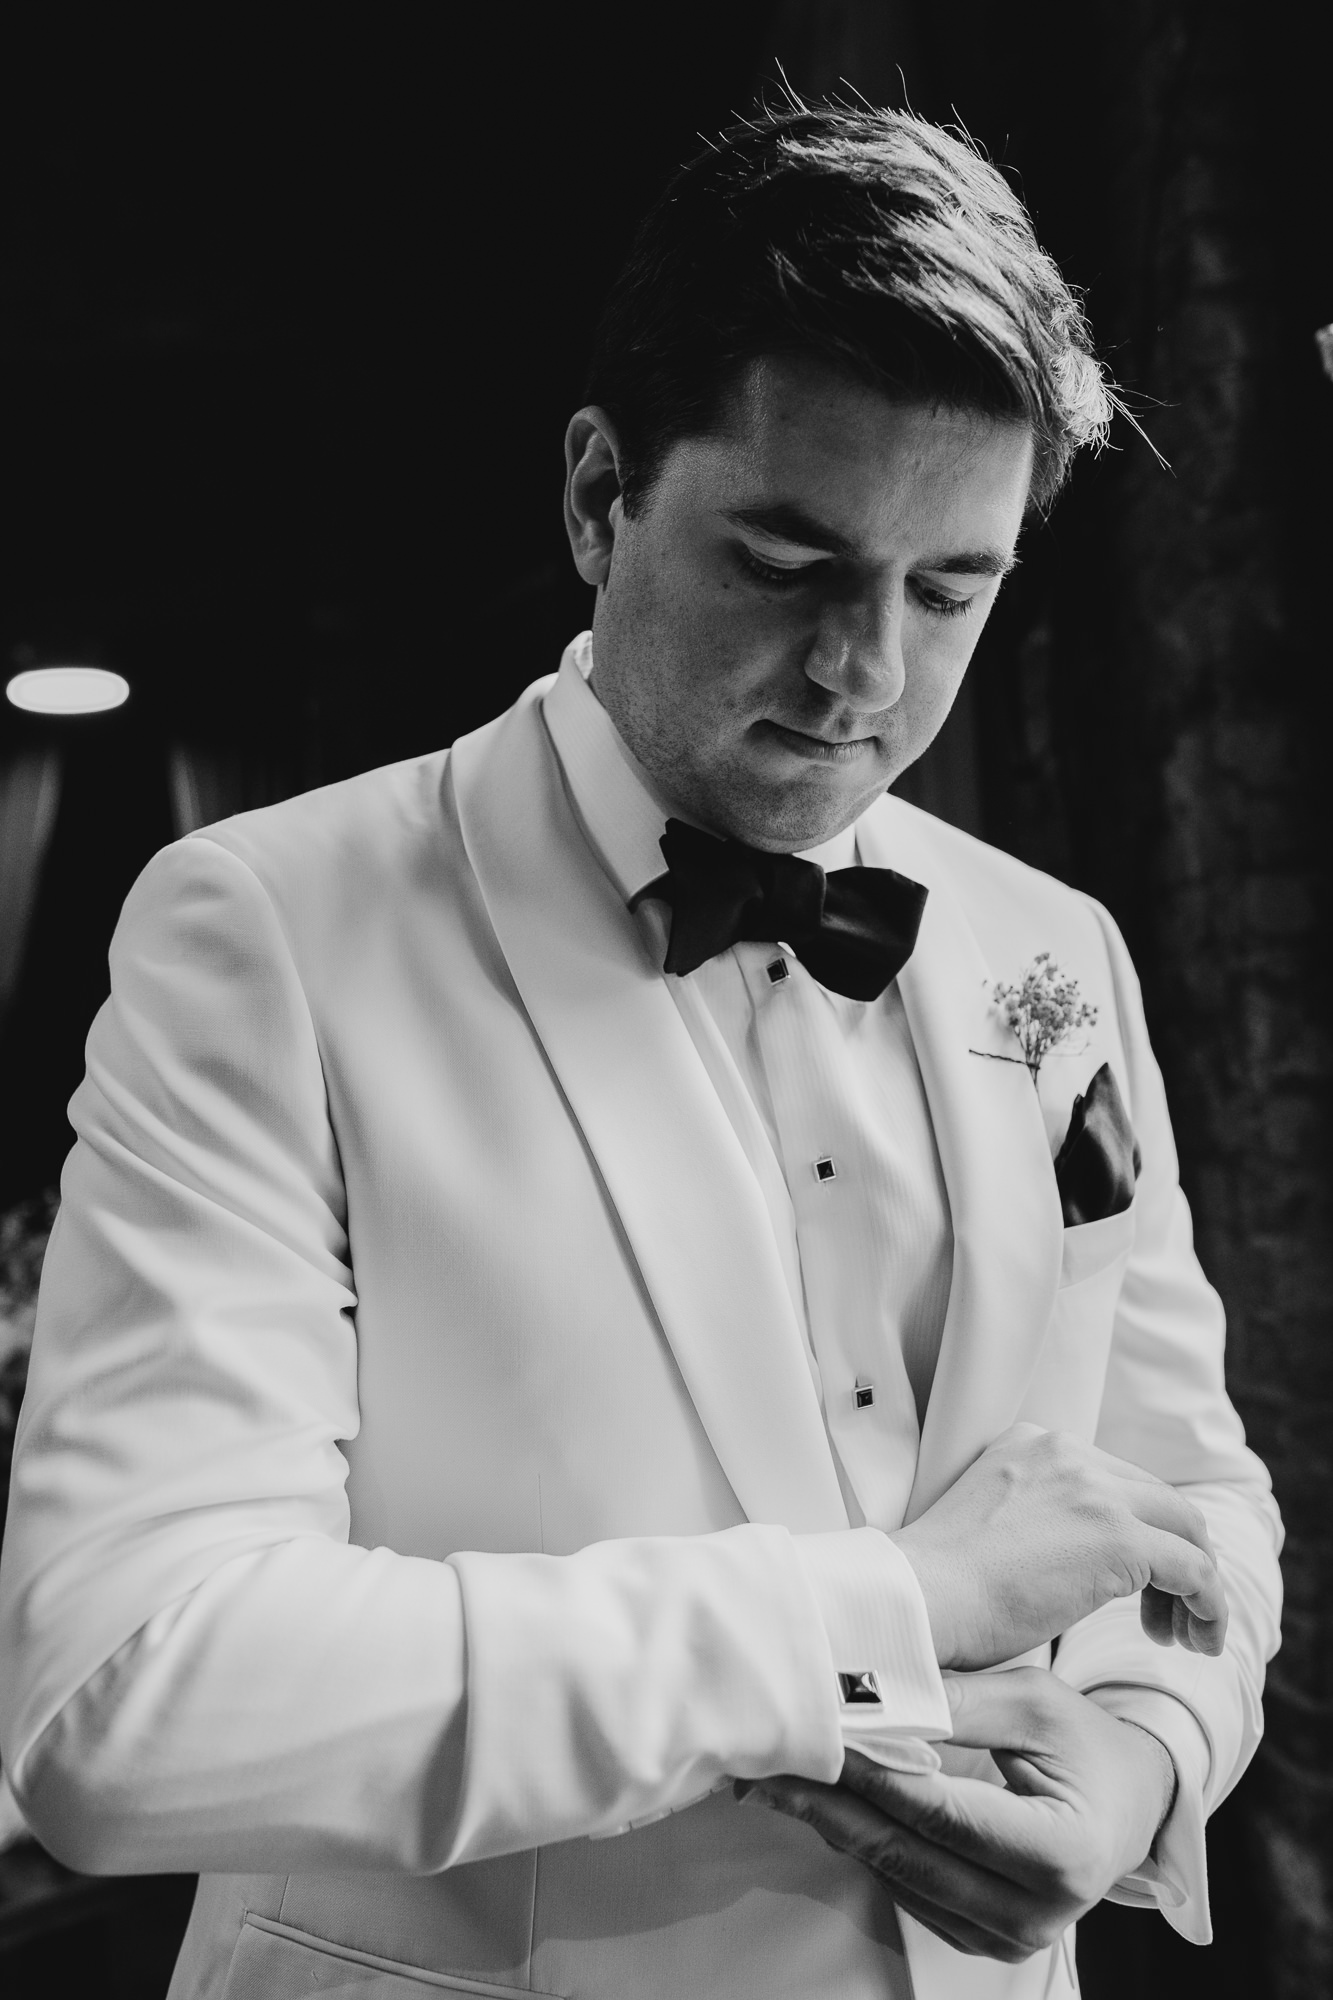 groom getting ready for his wedding at mymoon in brooklyn, new york